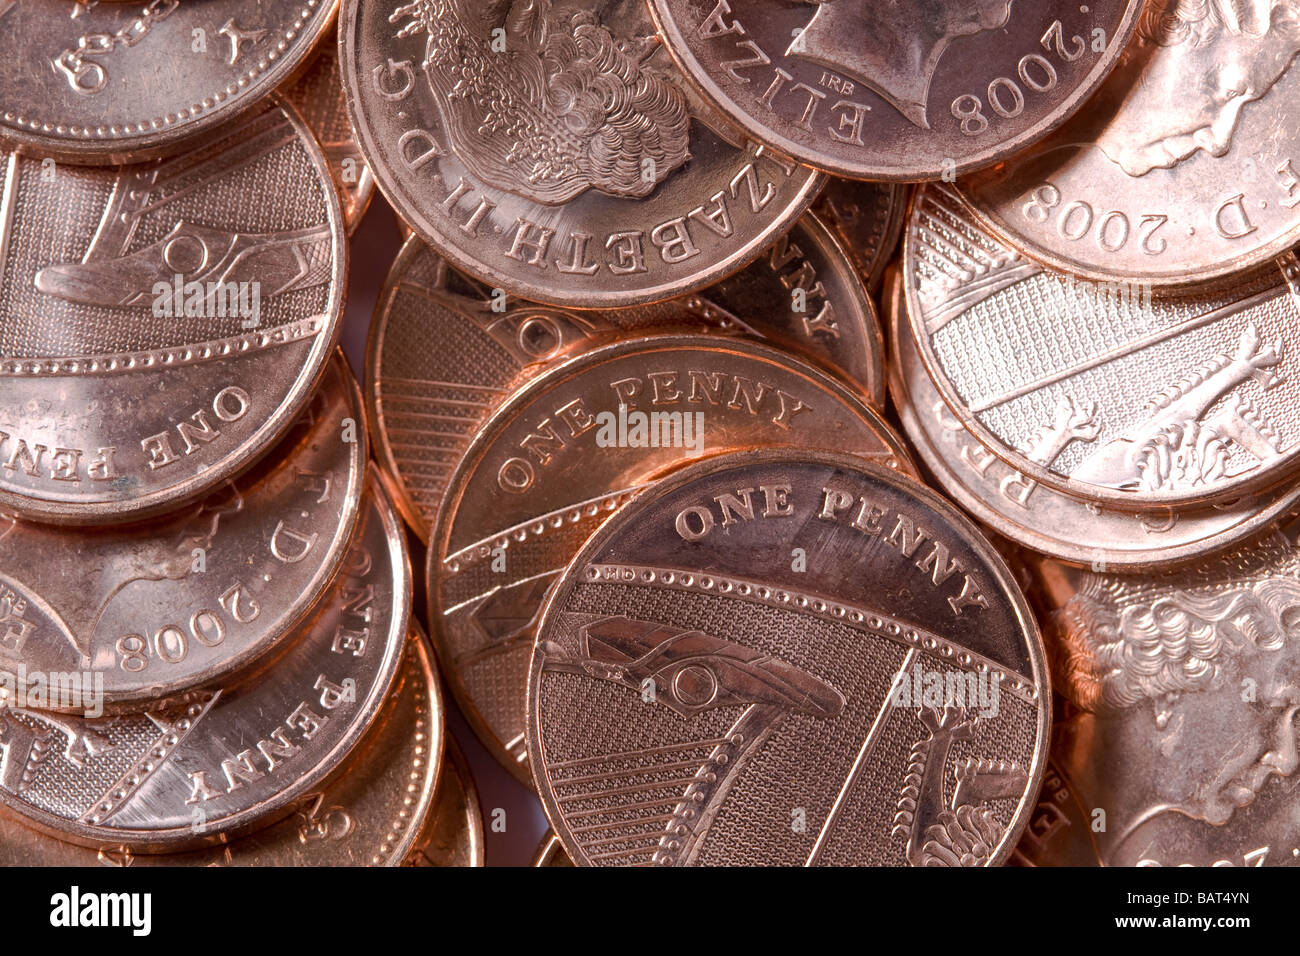 Pile of One Pence Coins Stock Photo